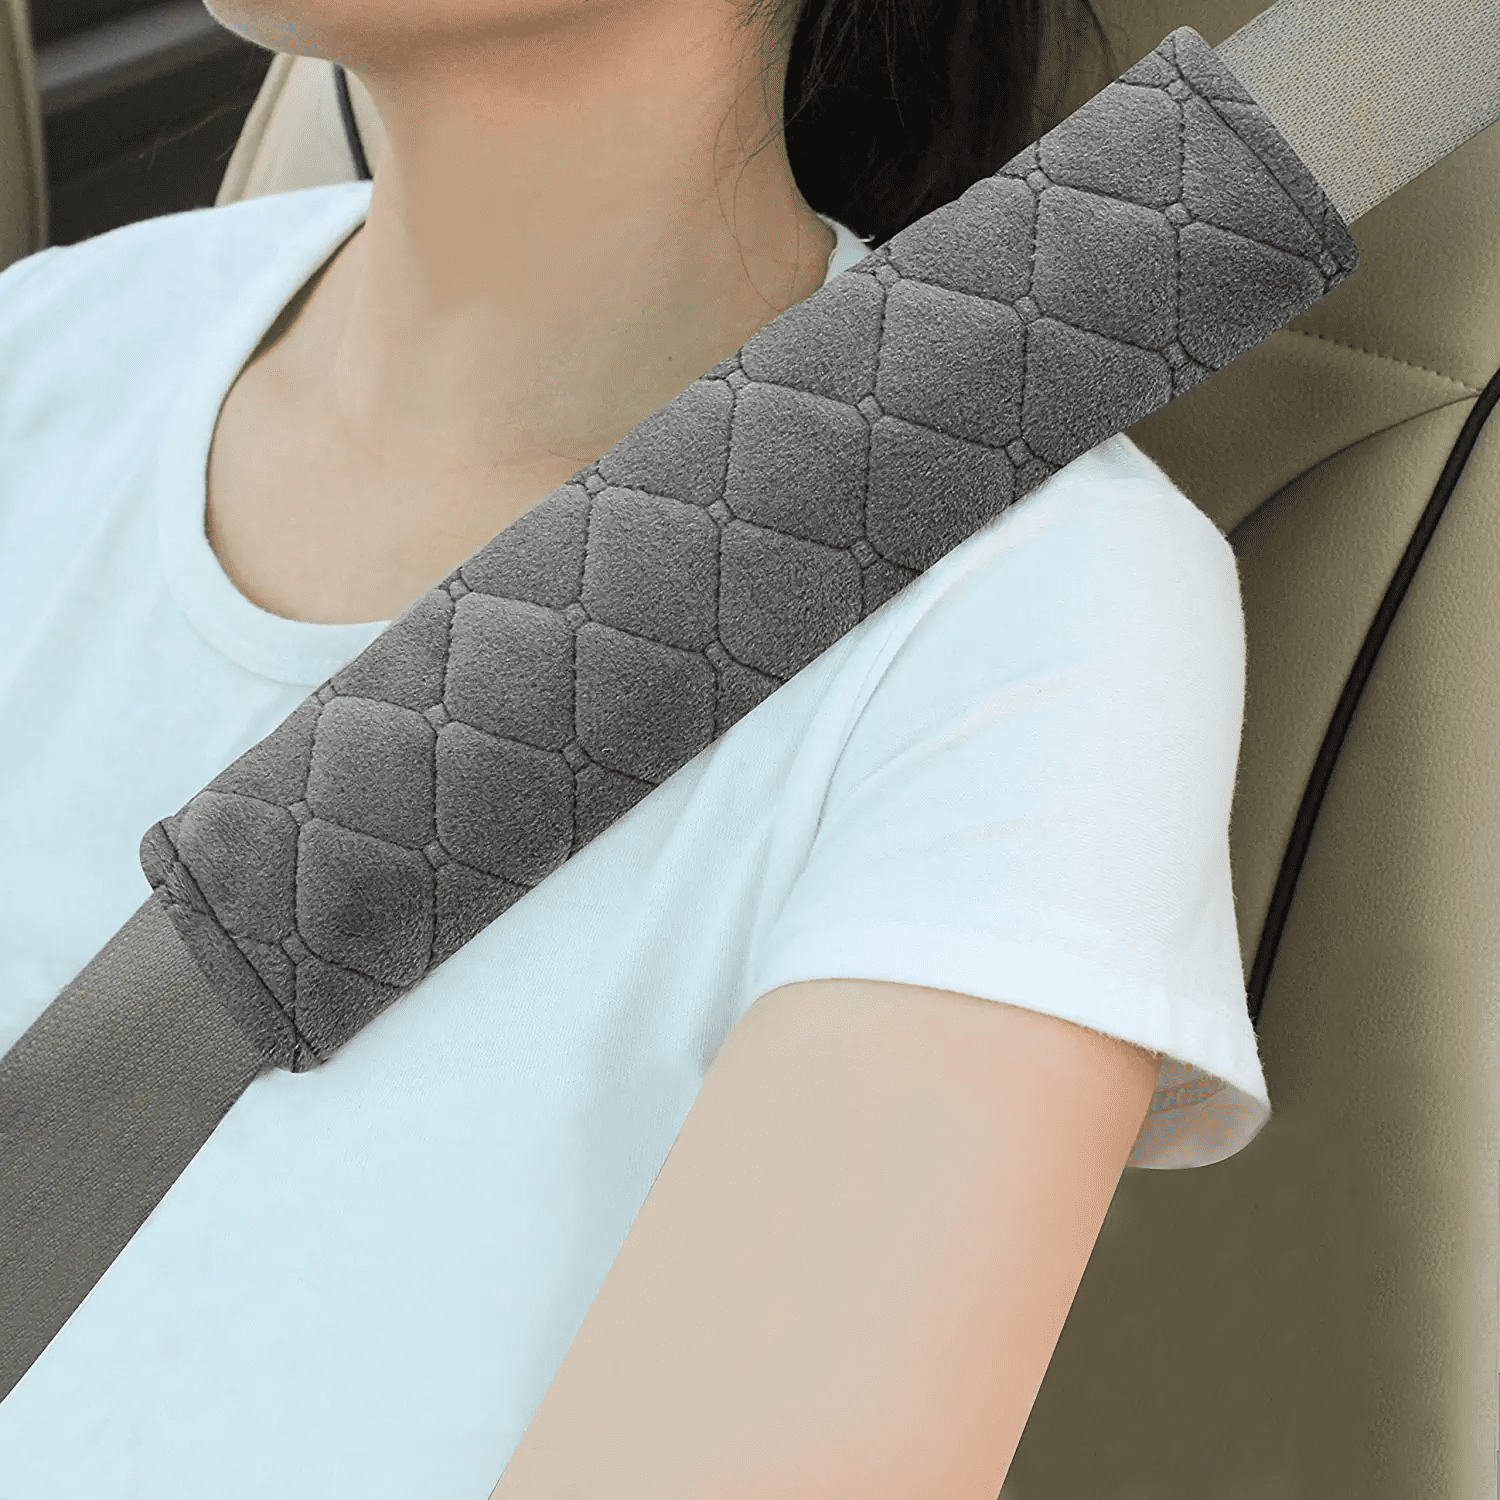 Golden Sea Turtle Plumeria Soft Comfy Seat Belt Pads Covers for Adults Shoulder Belt Pad Protect You Neck from The Seatbelt Rubbing Dolyues Black Car Safety Seatbelt Strap Cover for Women Ladies 